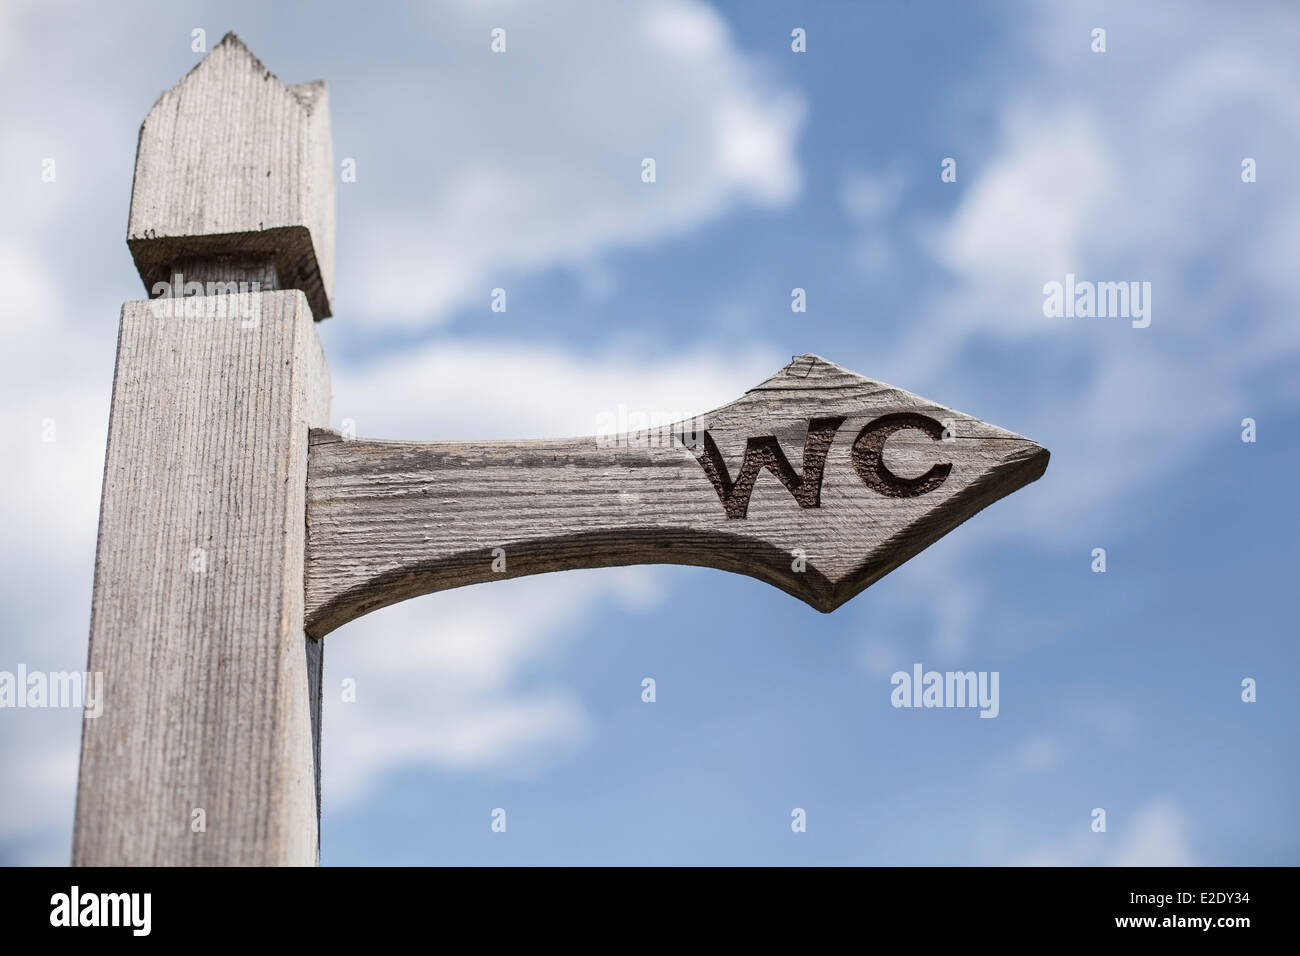 Old wooden signpost over blue sky background. Stock Photo